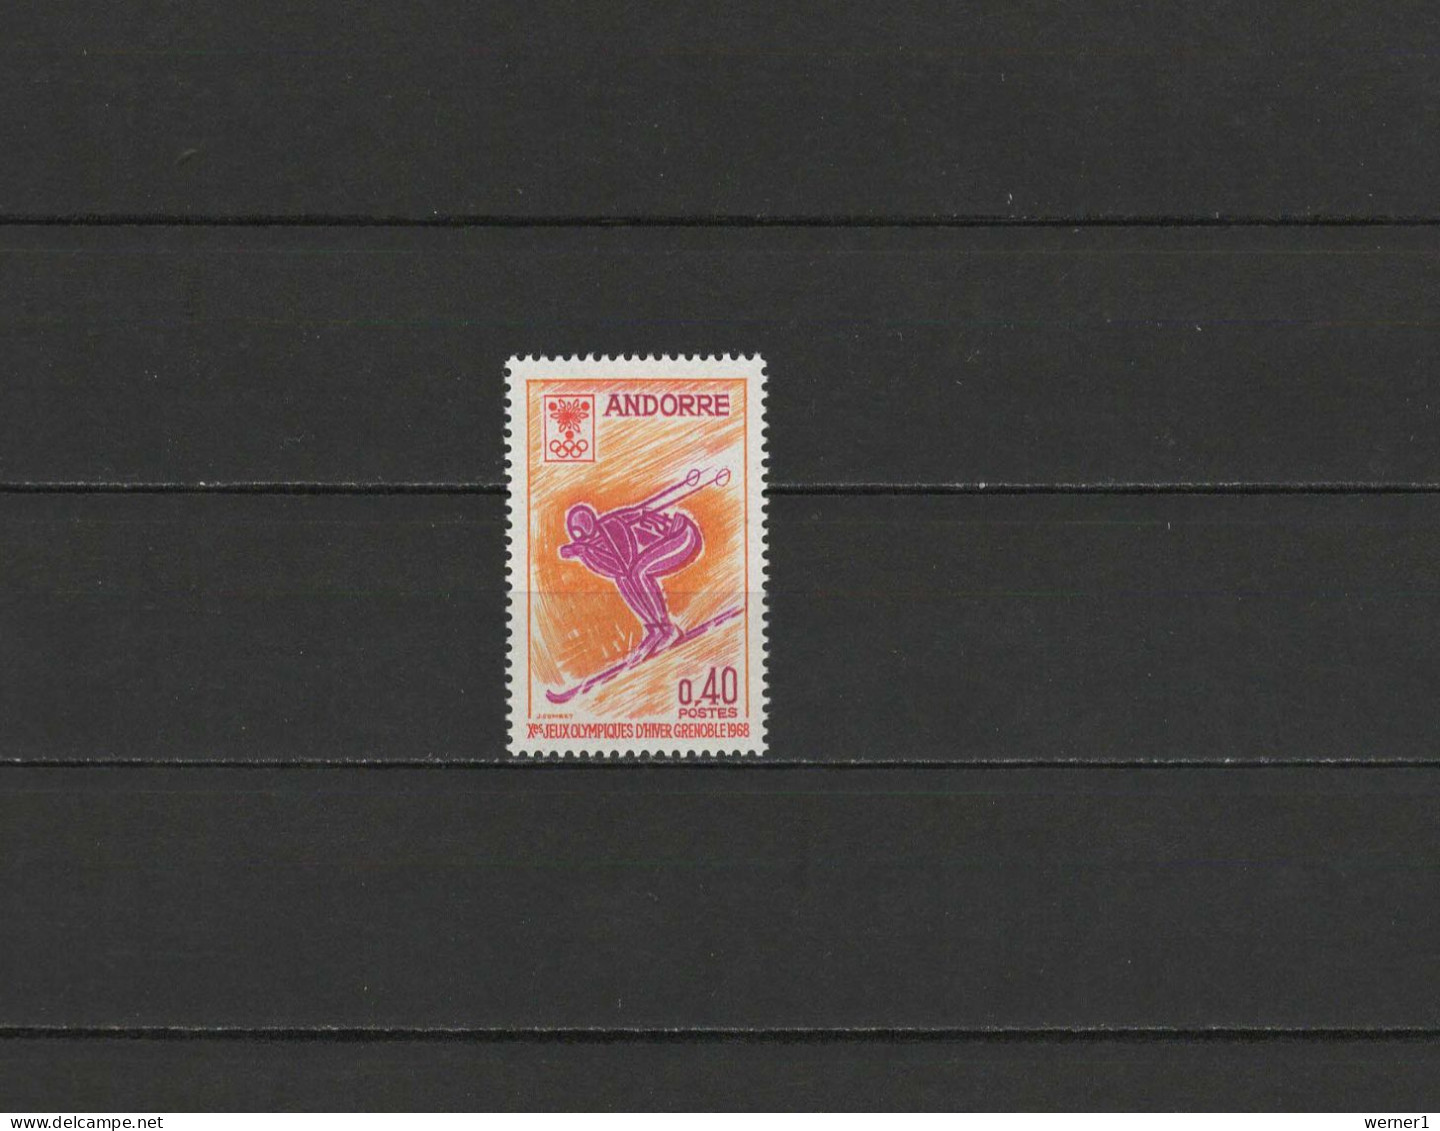 Andorra French 1968 Olympic Games Grenoble Stamp MNH - Winter 1968: Grenoble